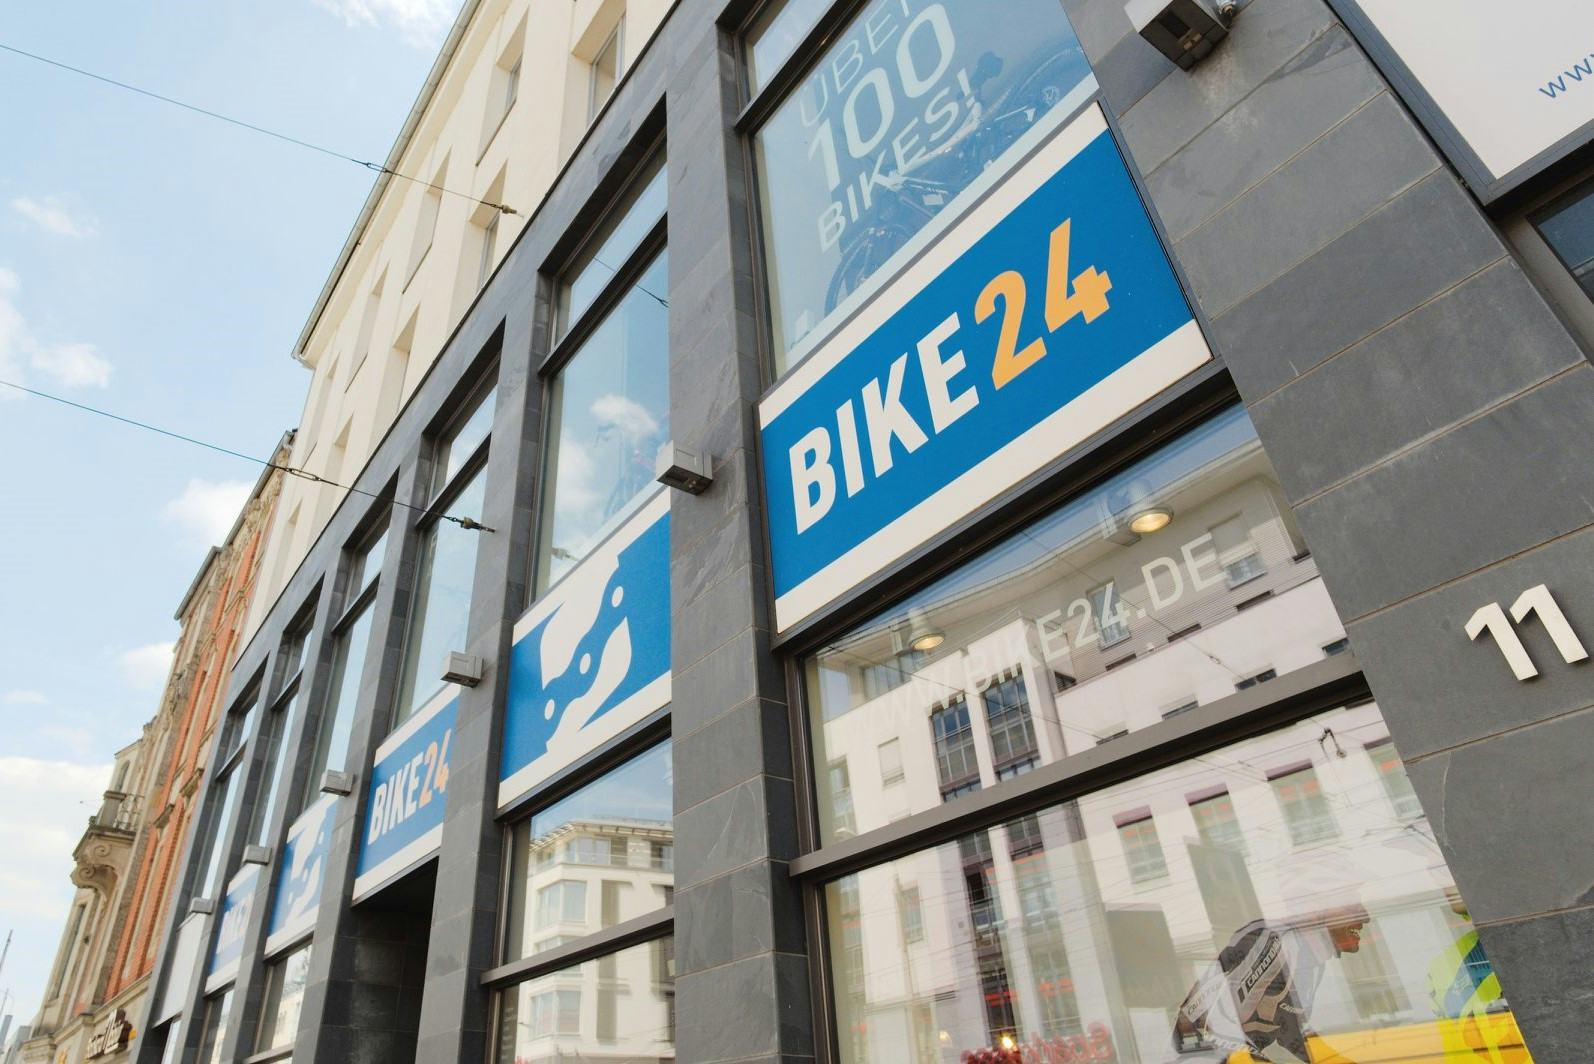 Following a successful IPO this year, Bike24 is continuing with expansion plans in Southern Europe. - Photo Bike24